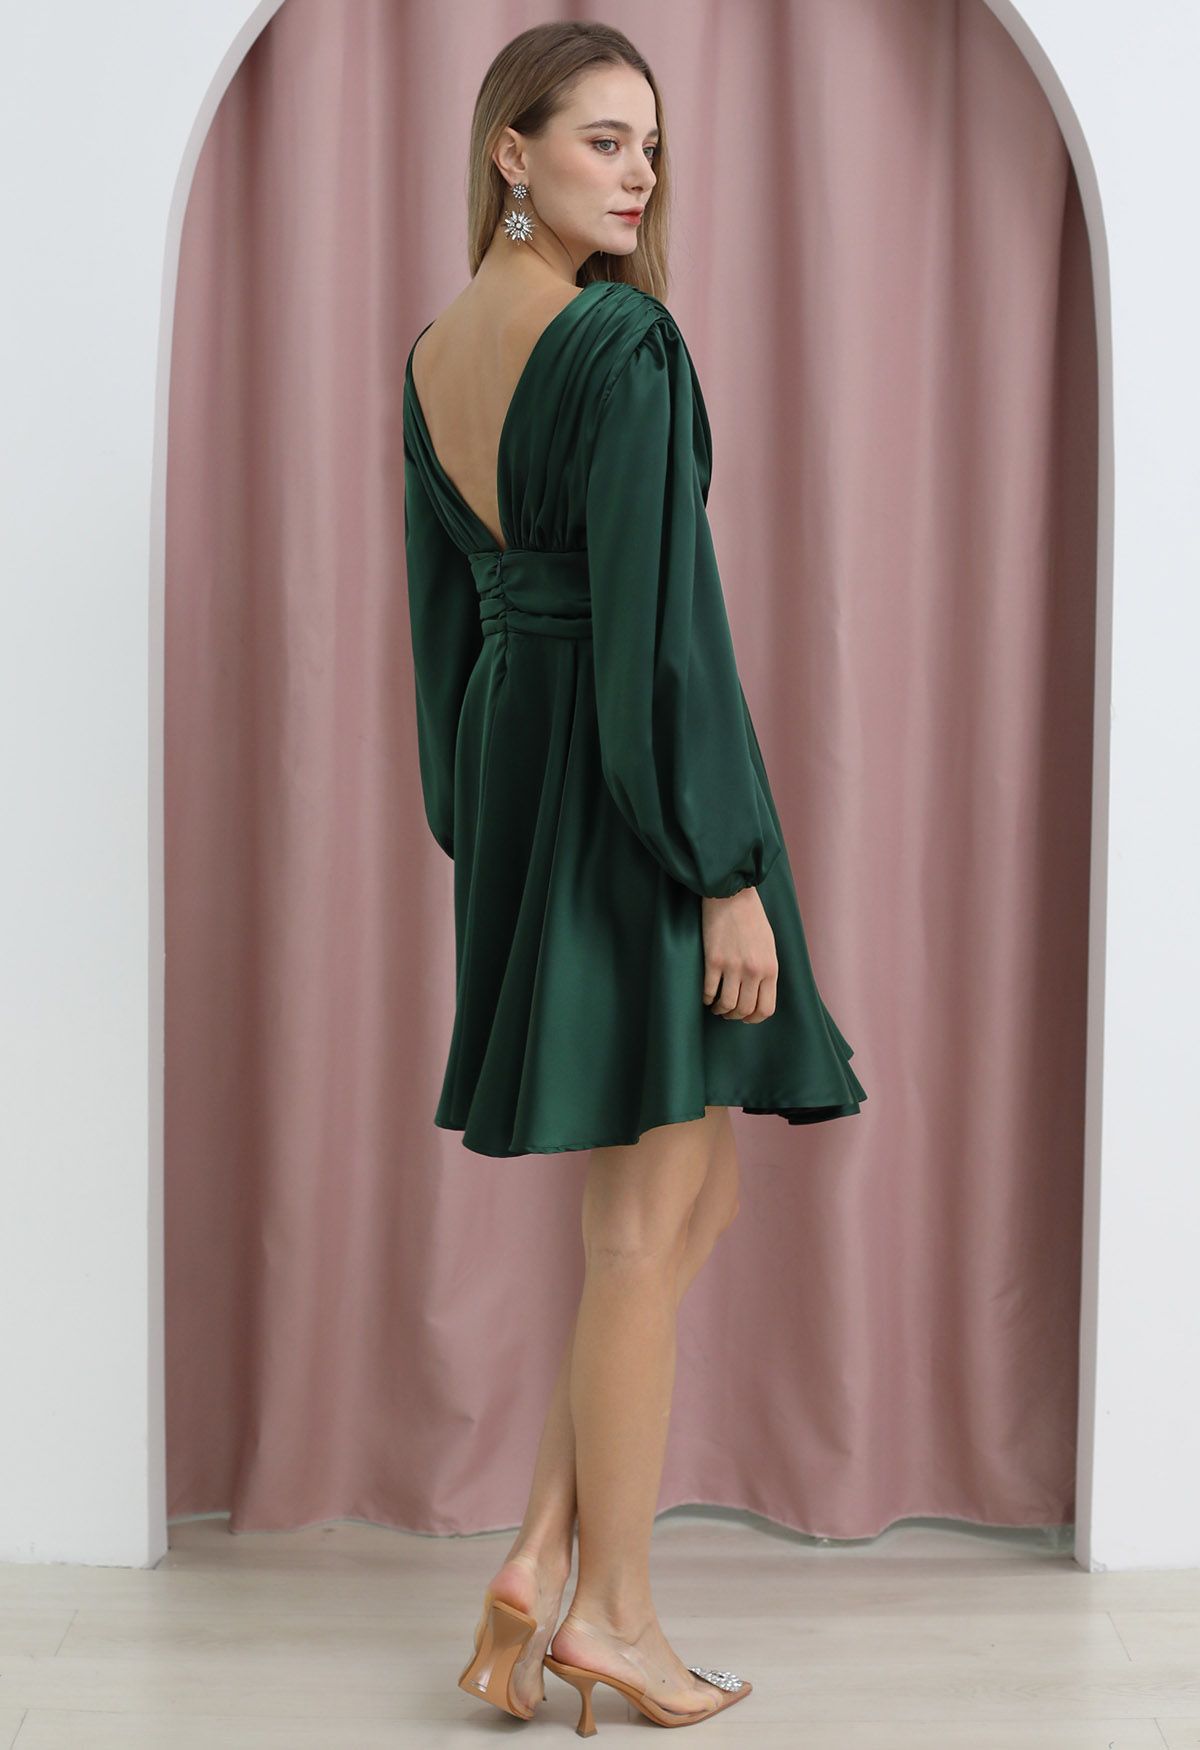 Plunging V-Neck Ruched Waist Satin Dress in Emerald